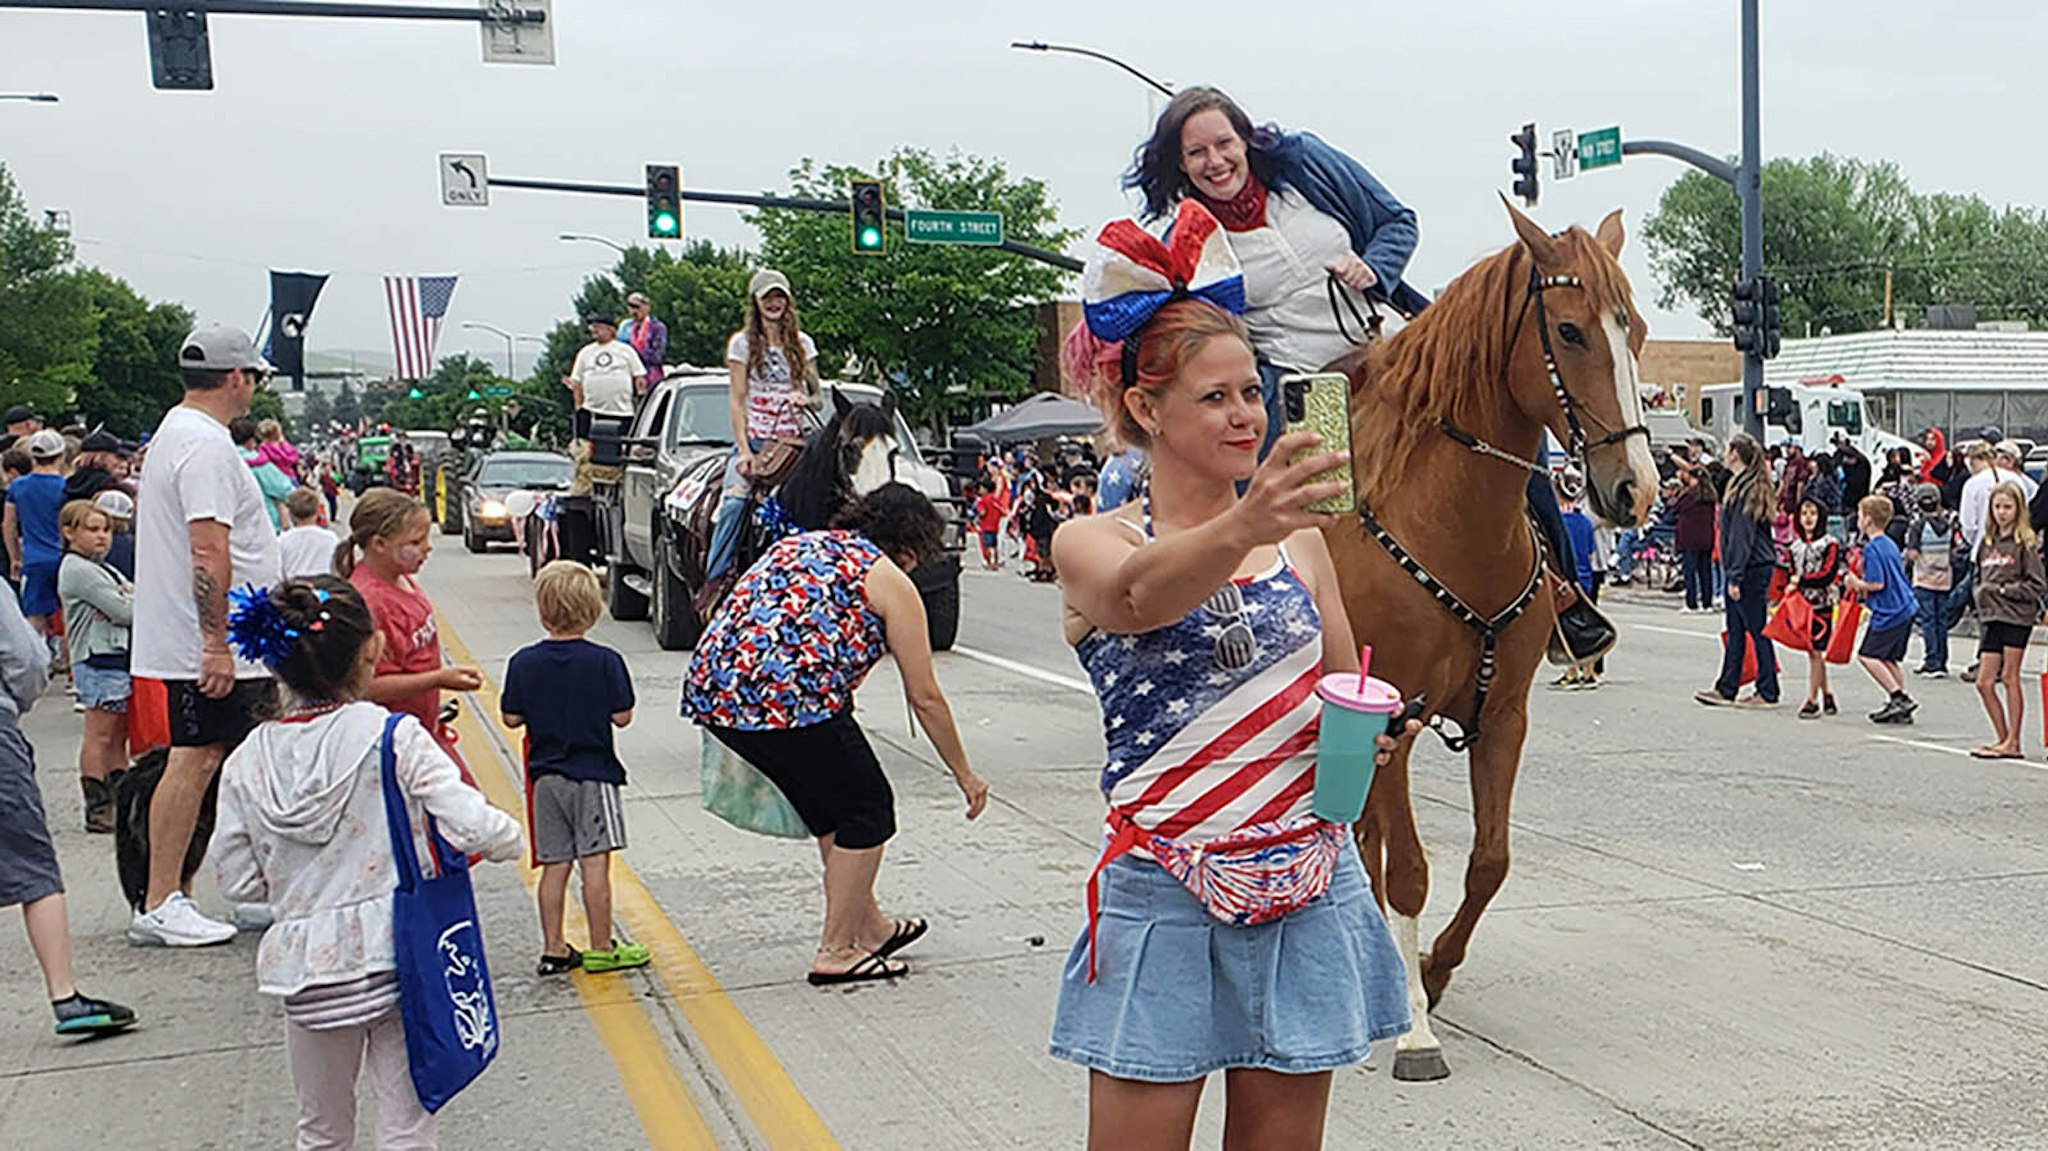 Lander’s Legendary Fourth Of July Party Draws Visitors From All Over